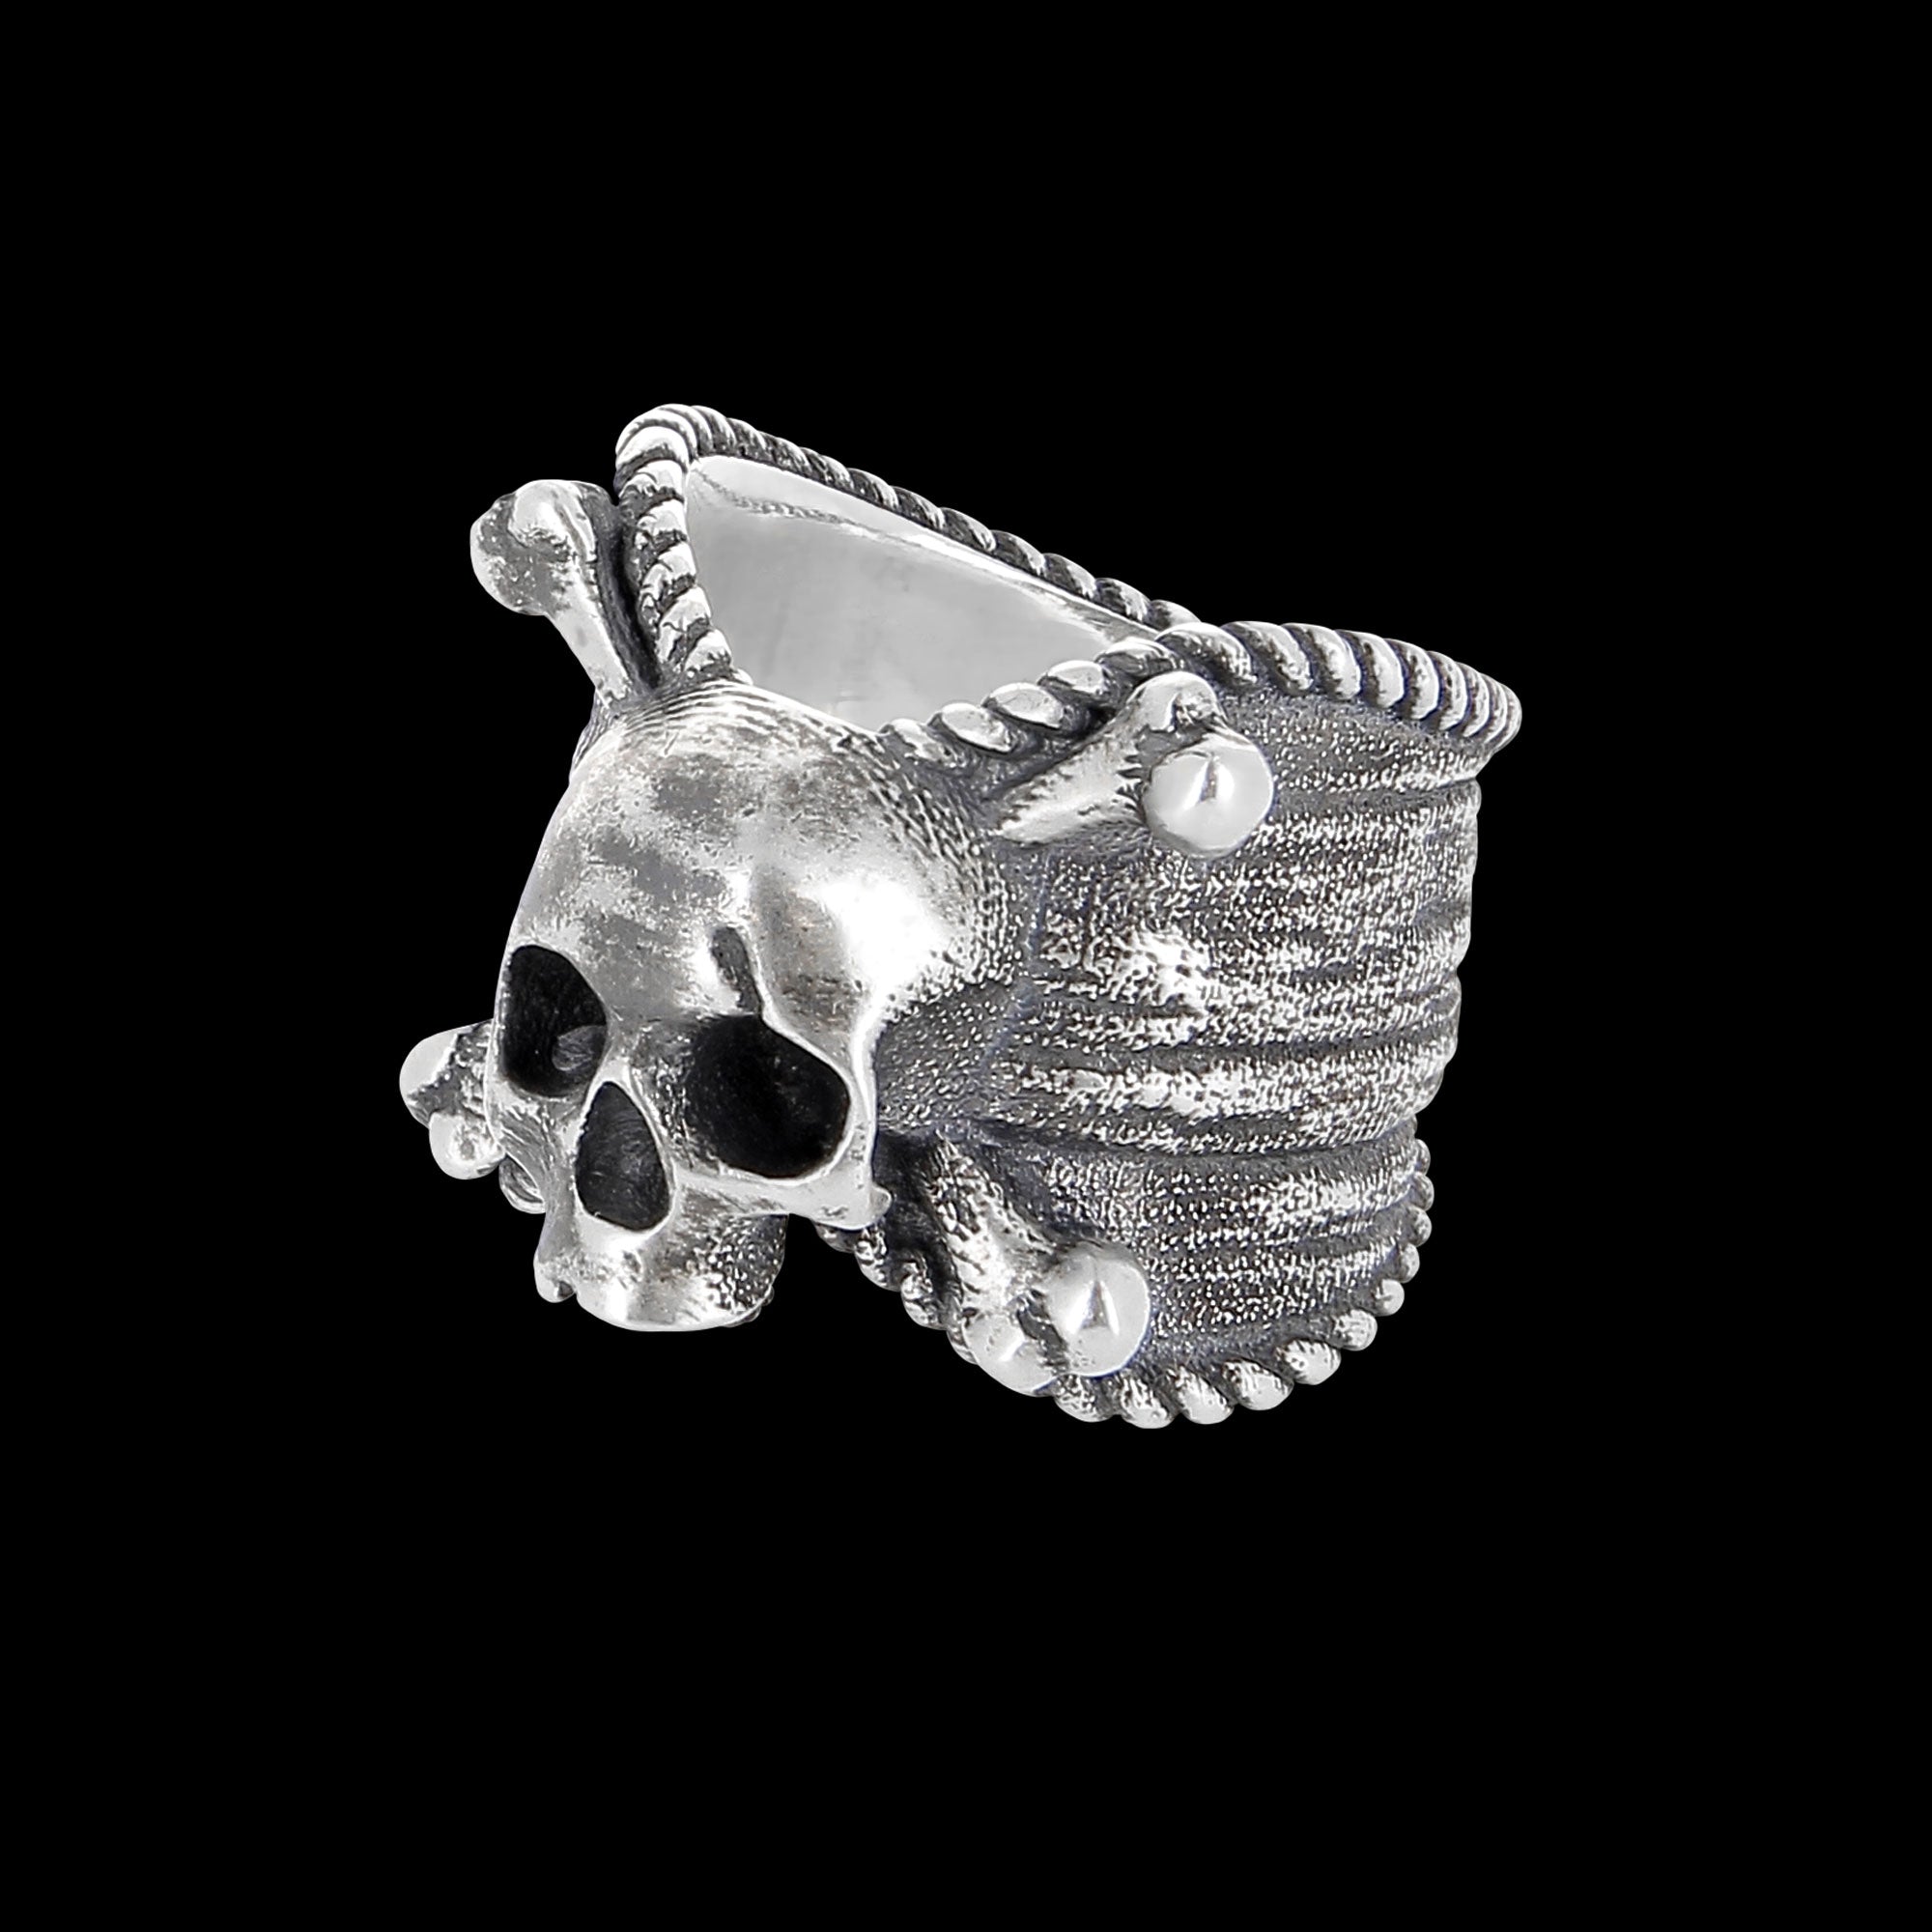 The Pirate's Mark - Sterling Silver Skull Ring